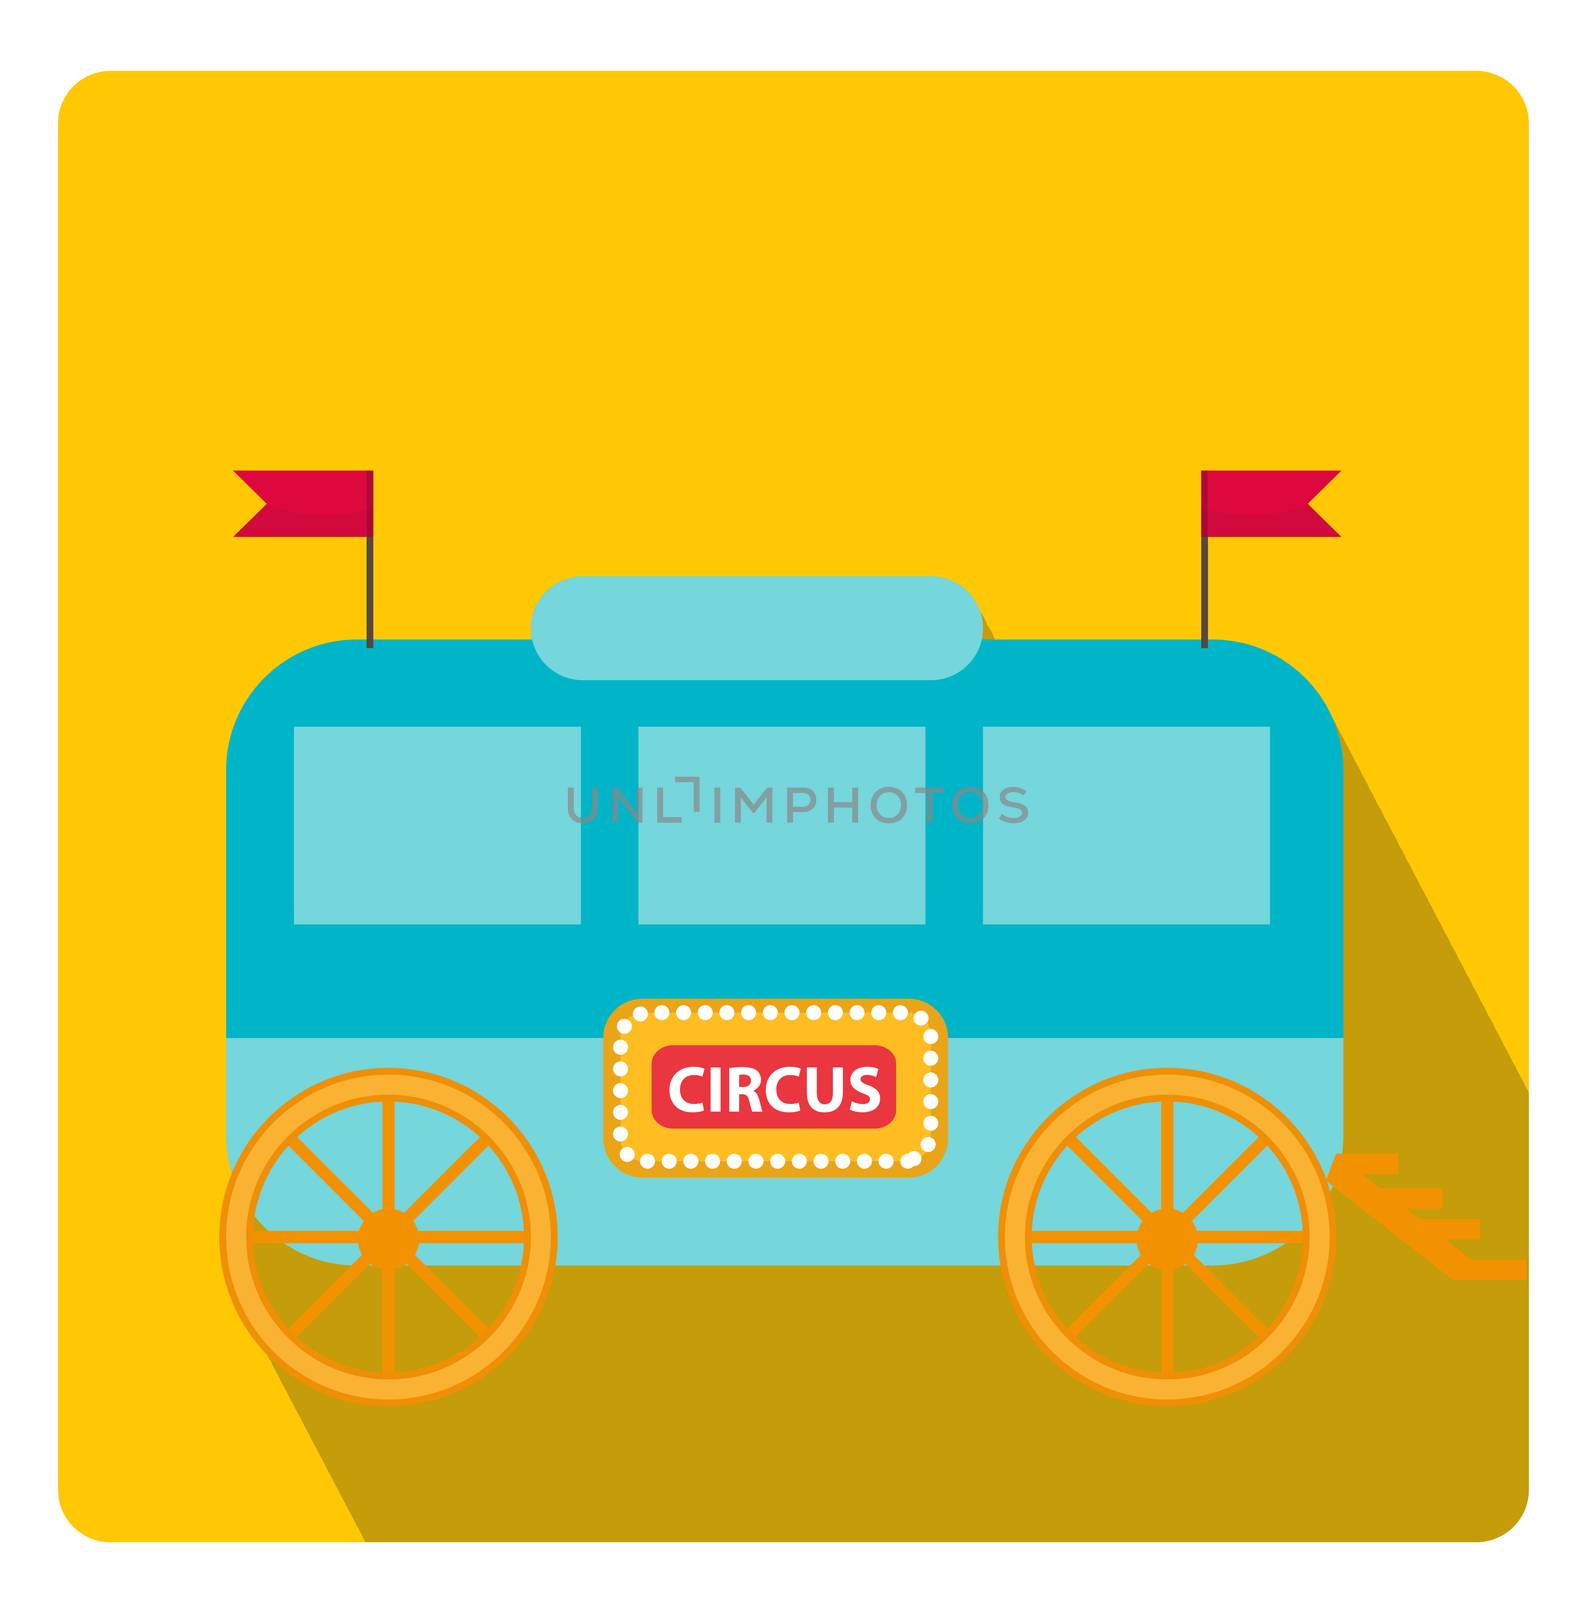 Circus trailer, wagon icon flat style with long shadows, isolated on white background. illustration. by lucia_fox